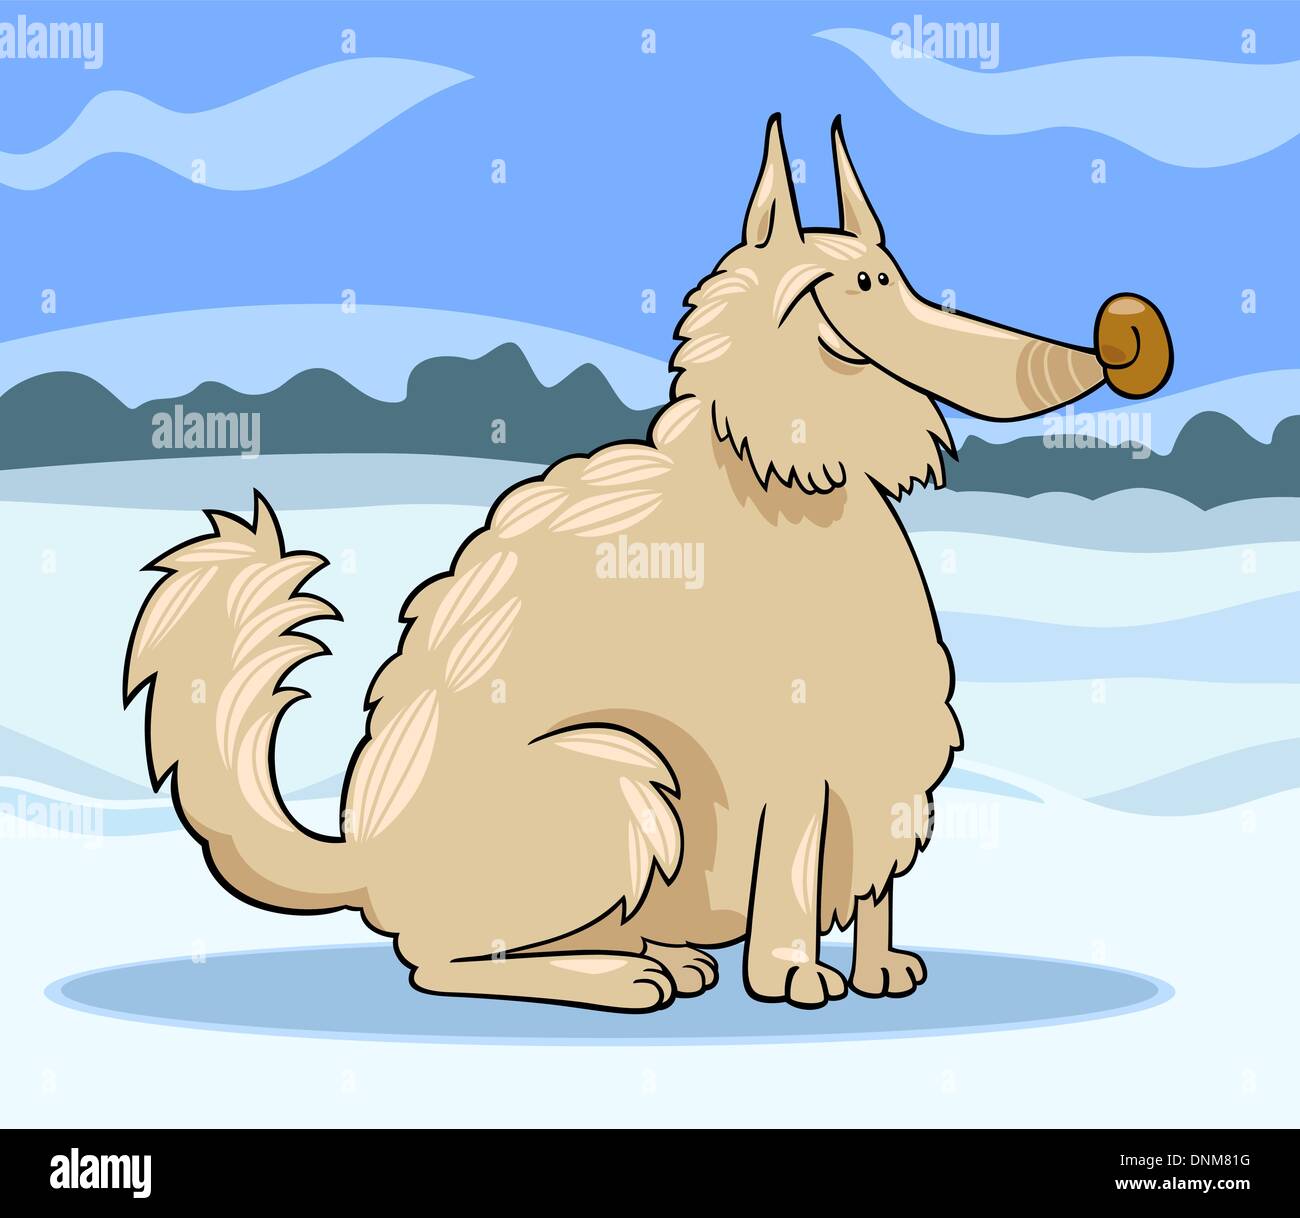 Cartoon Illustration of Shaggy Purebred Eskimo Dog or Spitz or Sheepdog against Winter Rural Scene with Snow Stock Vector